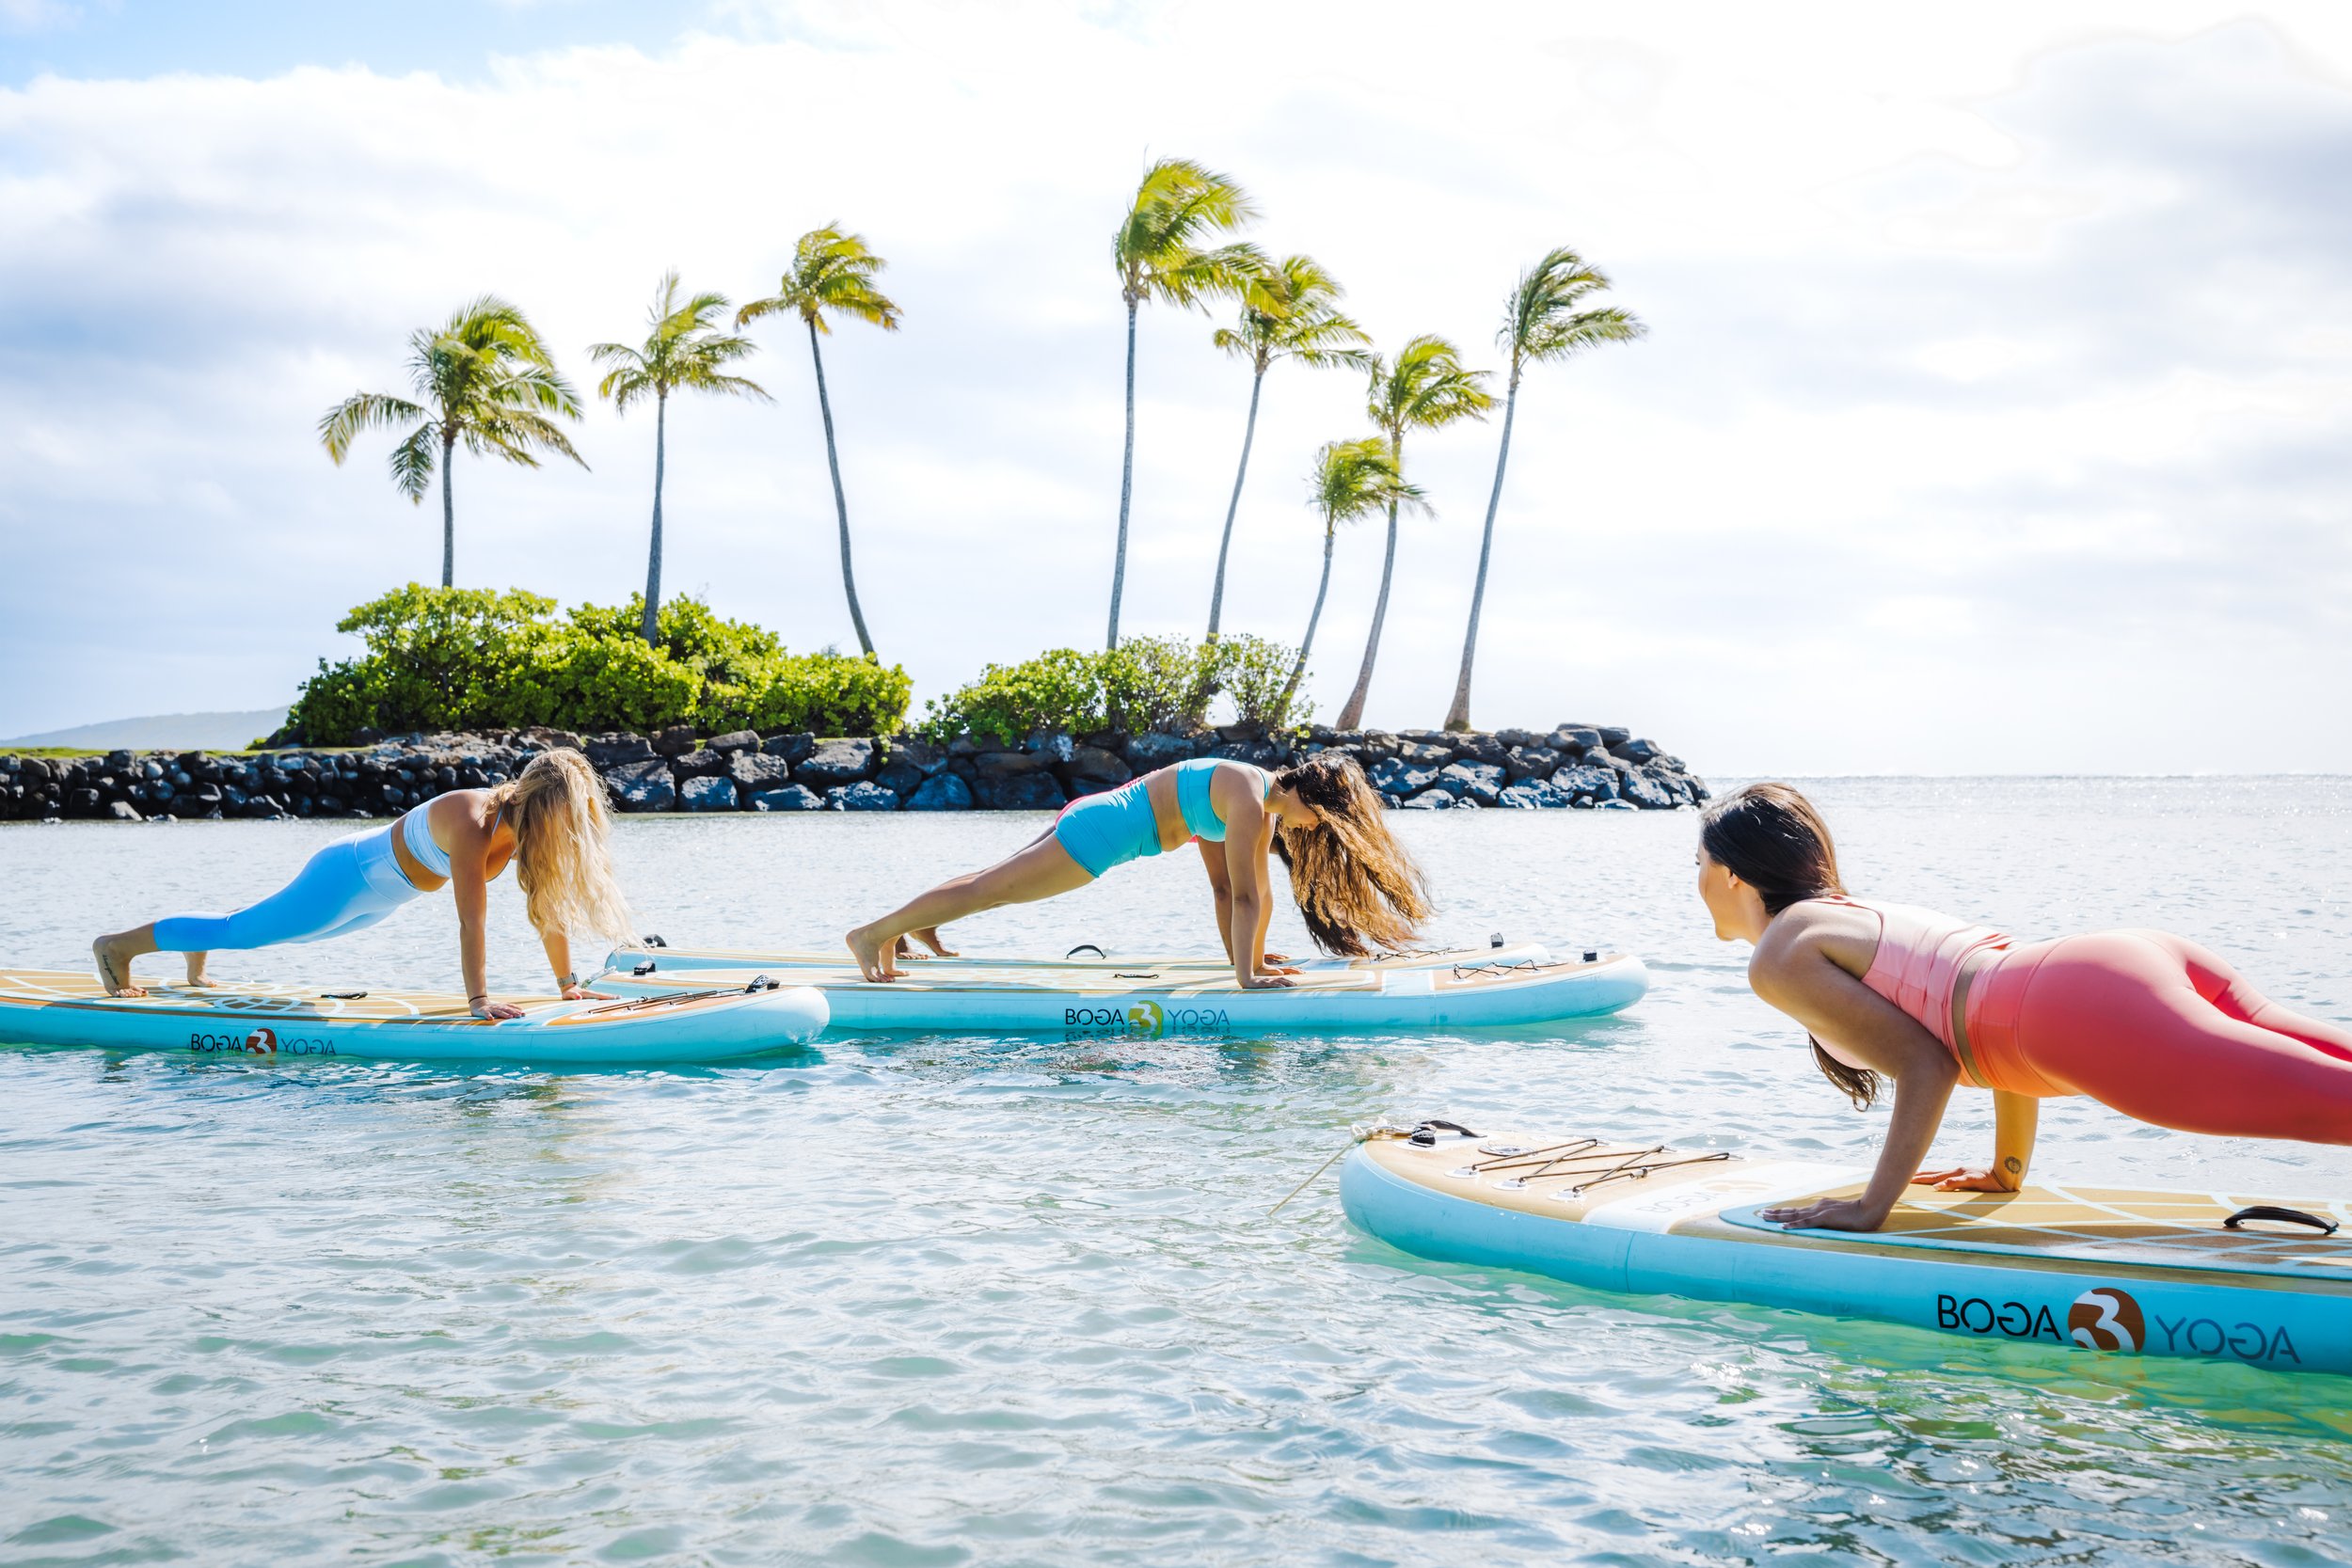 Night SUP Yoga and Fireworks at Magic Island: Book Tours